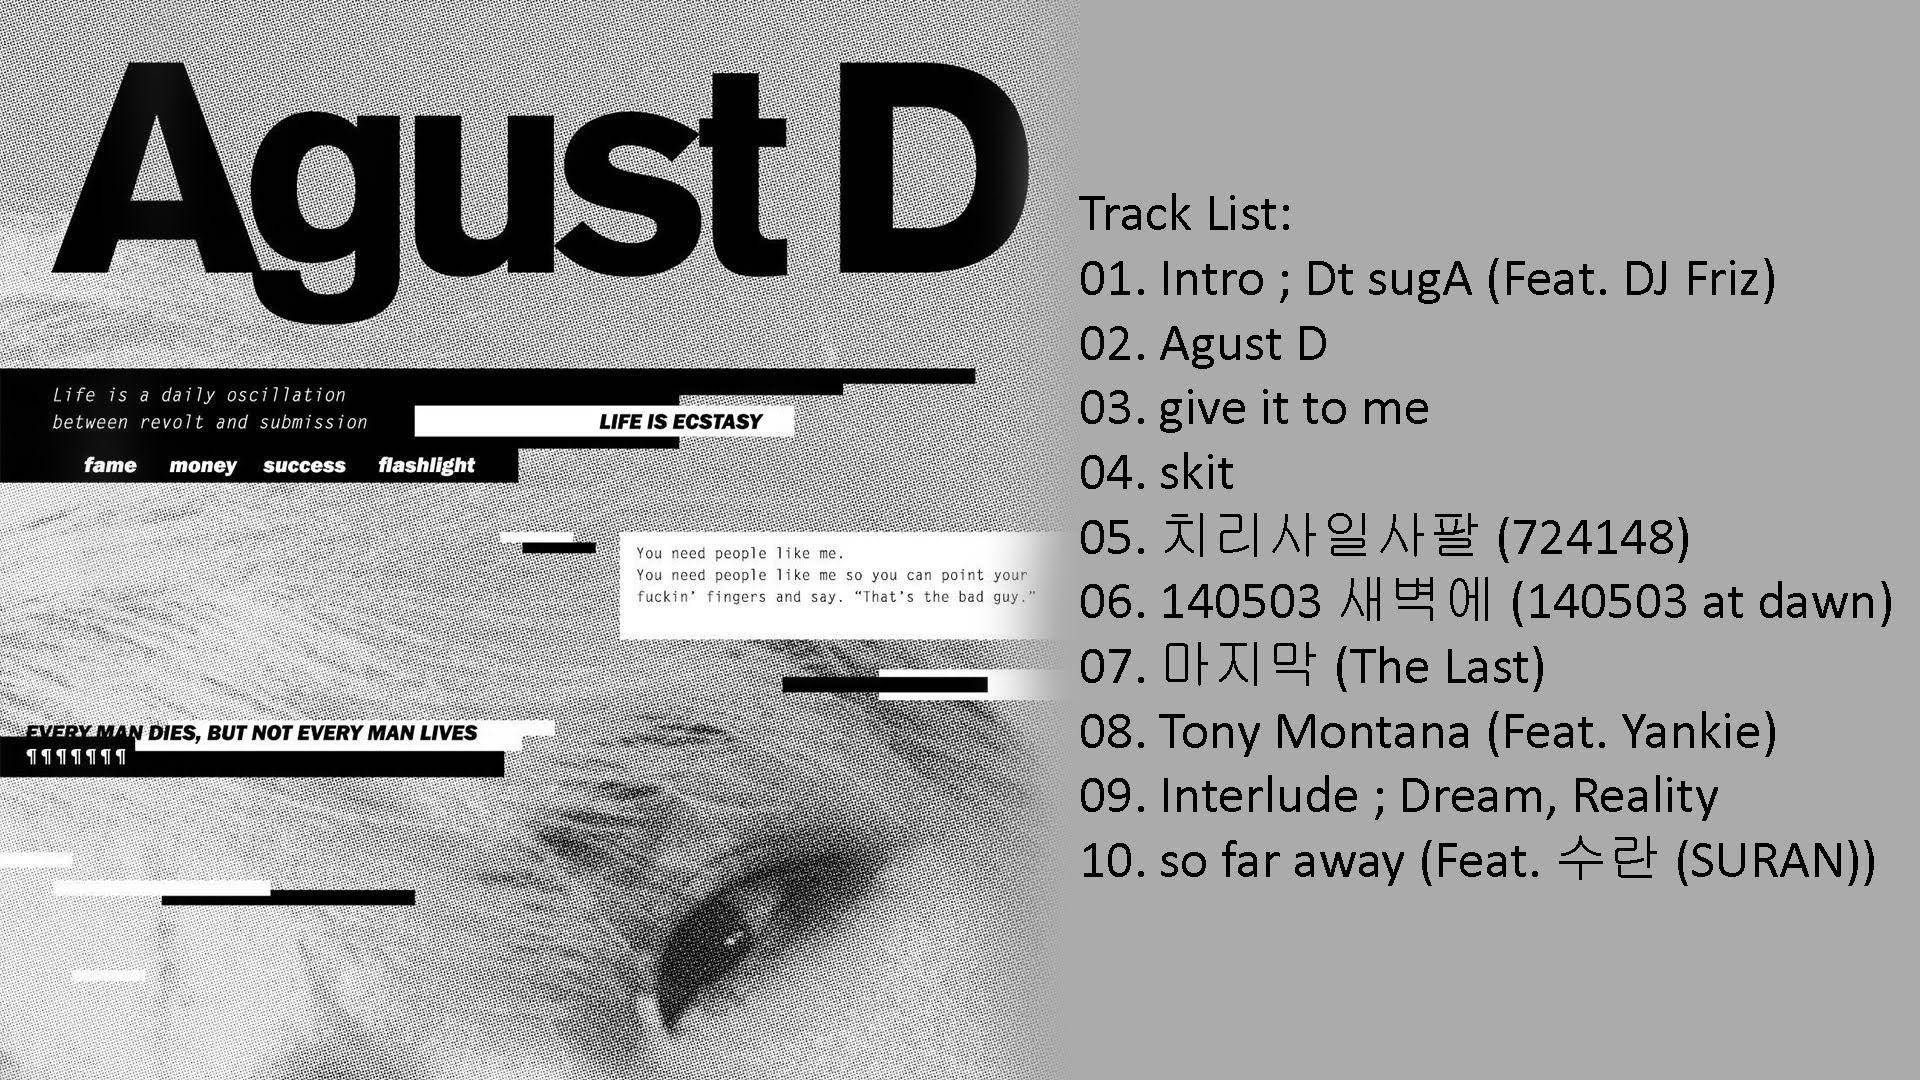 August D - A List Of Songs